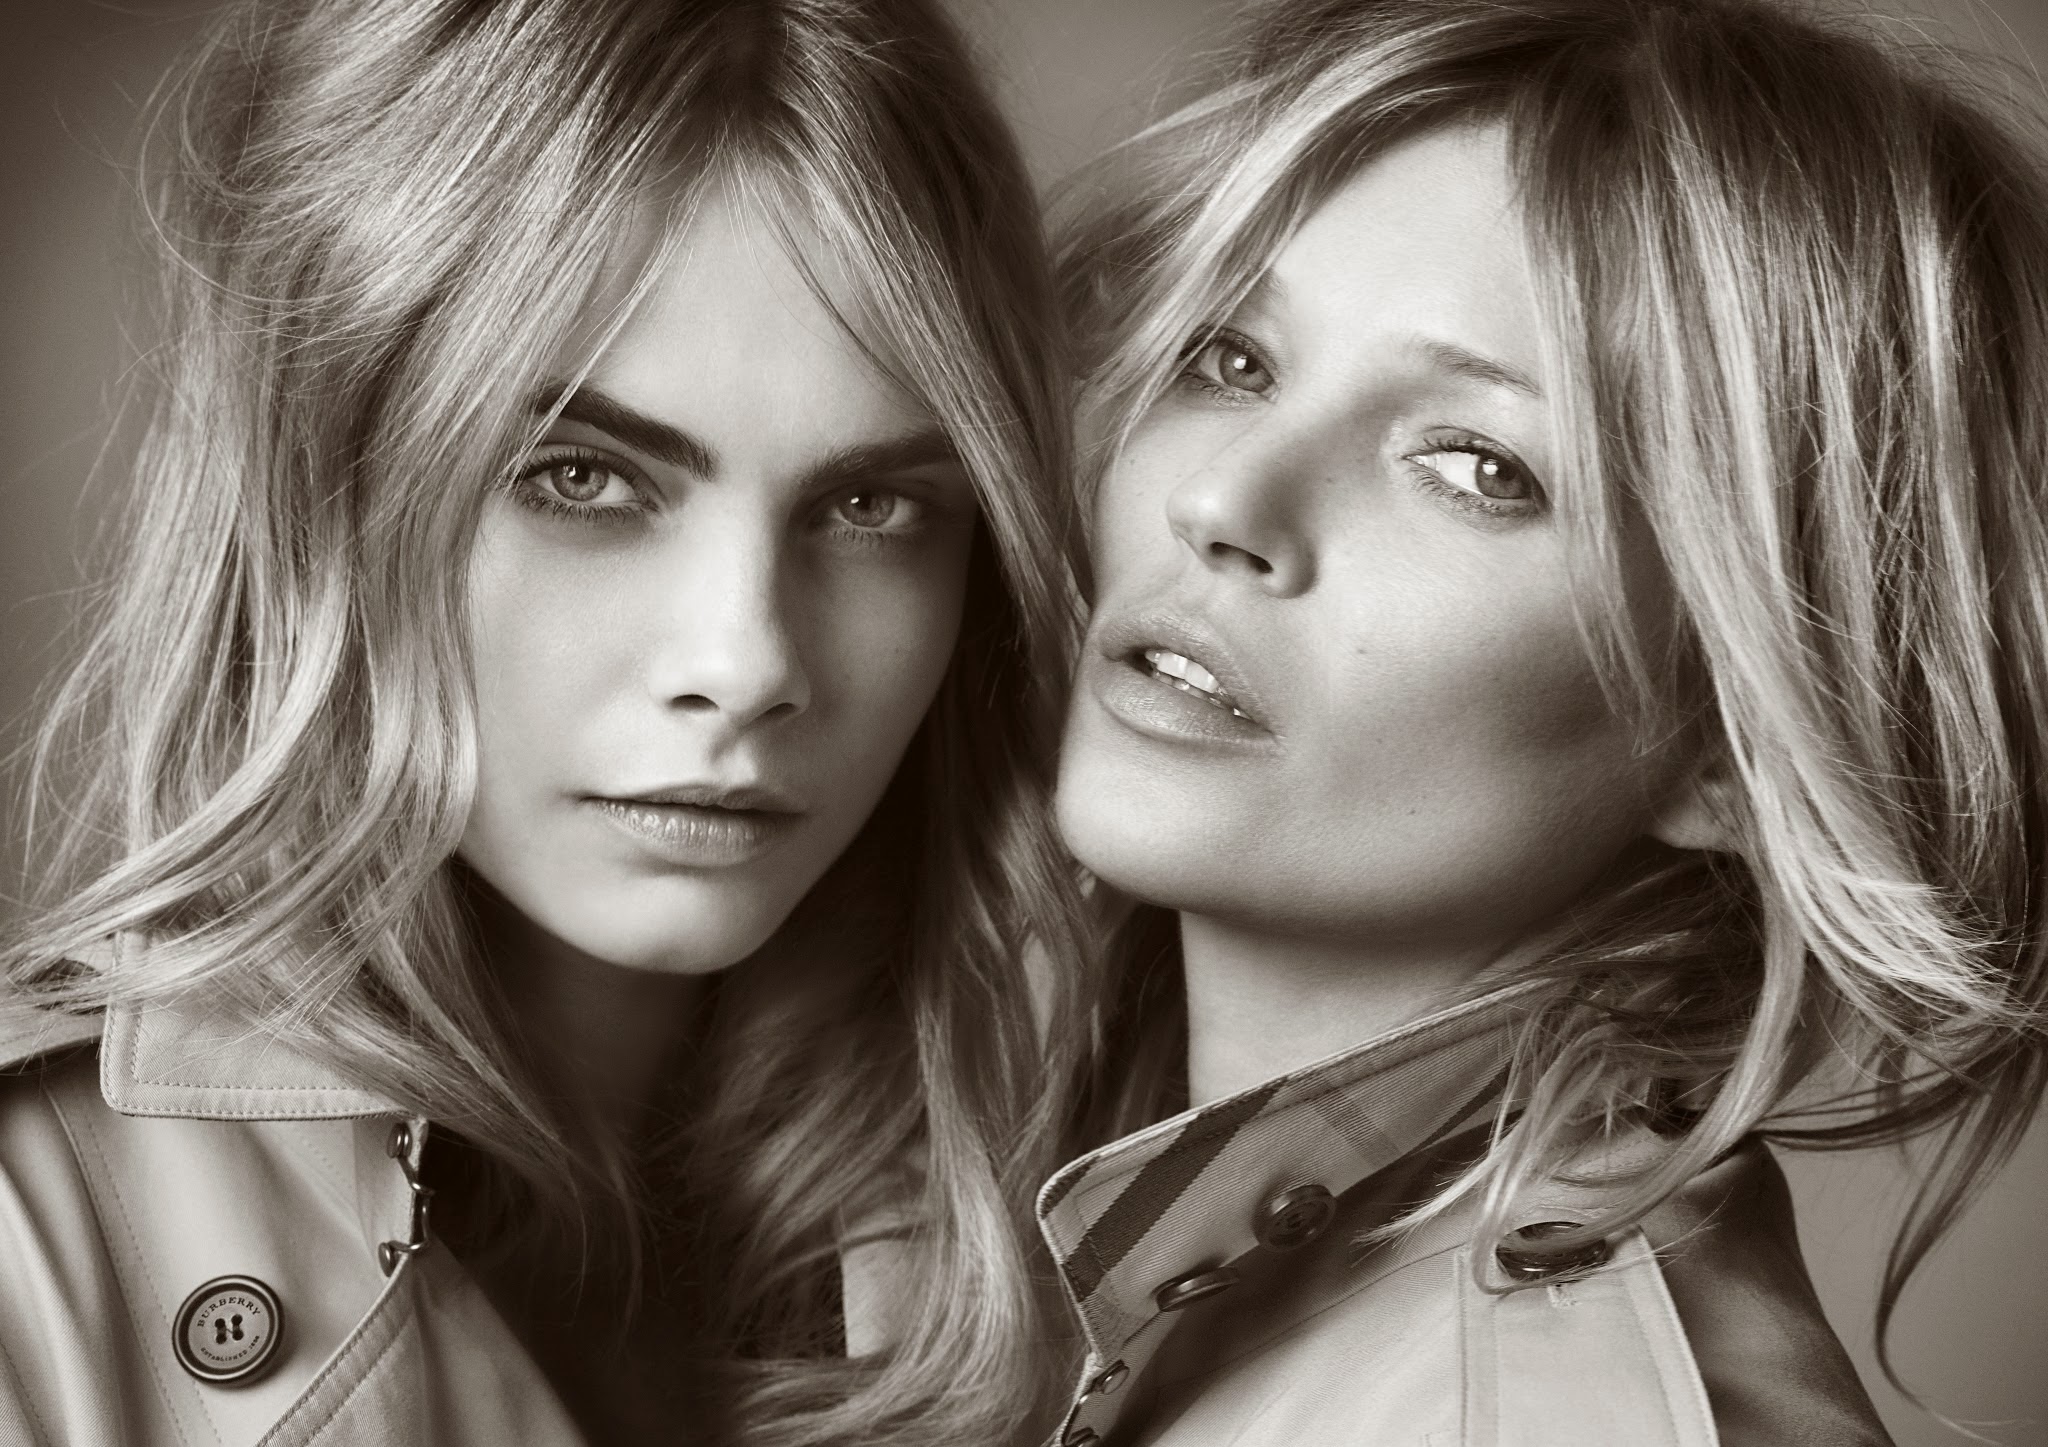 Burberry's "My Burberry" Ad Campaign & BTS Starring Cara Delevingne & Kate Moss